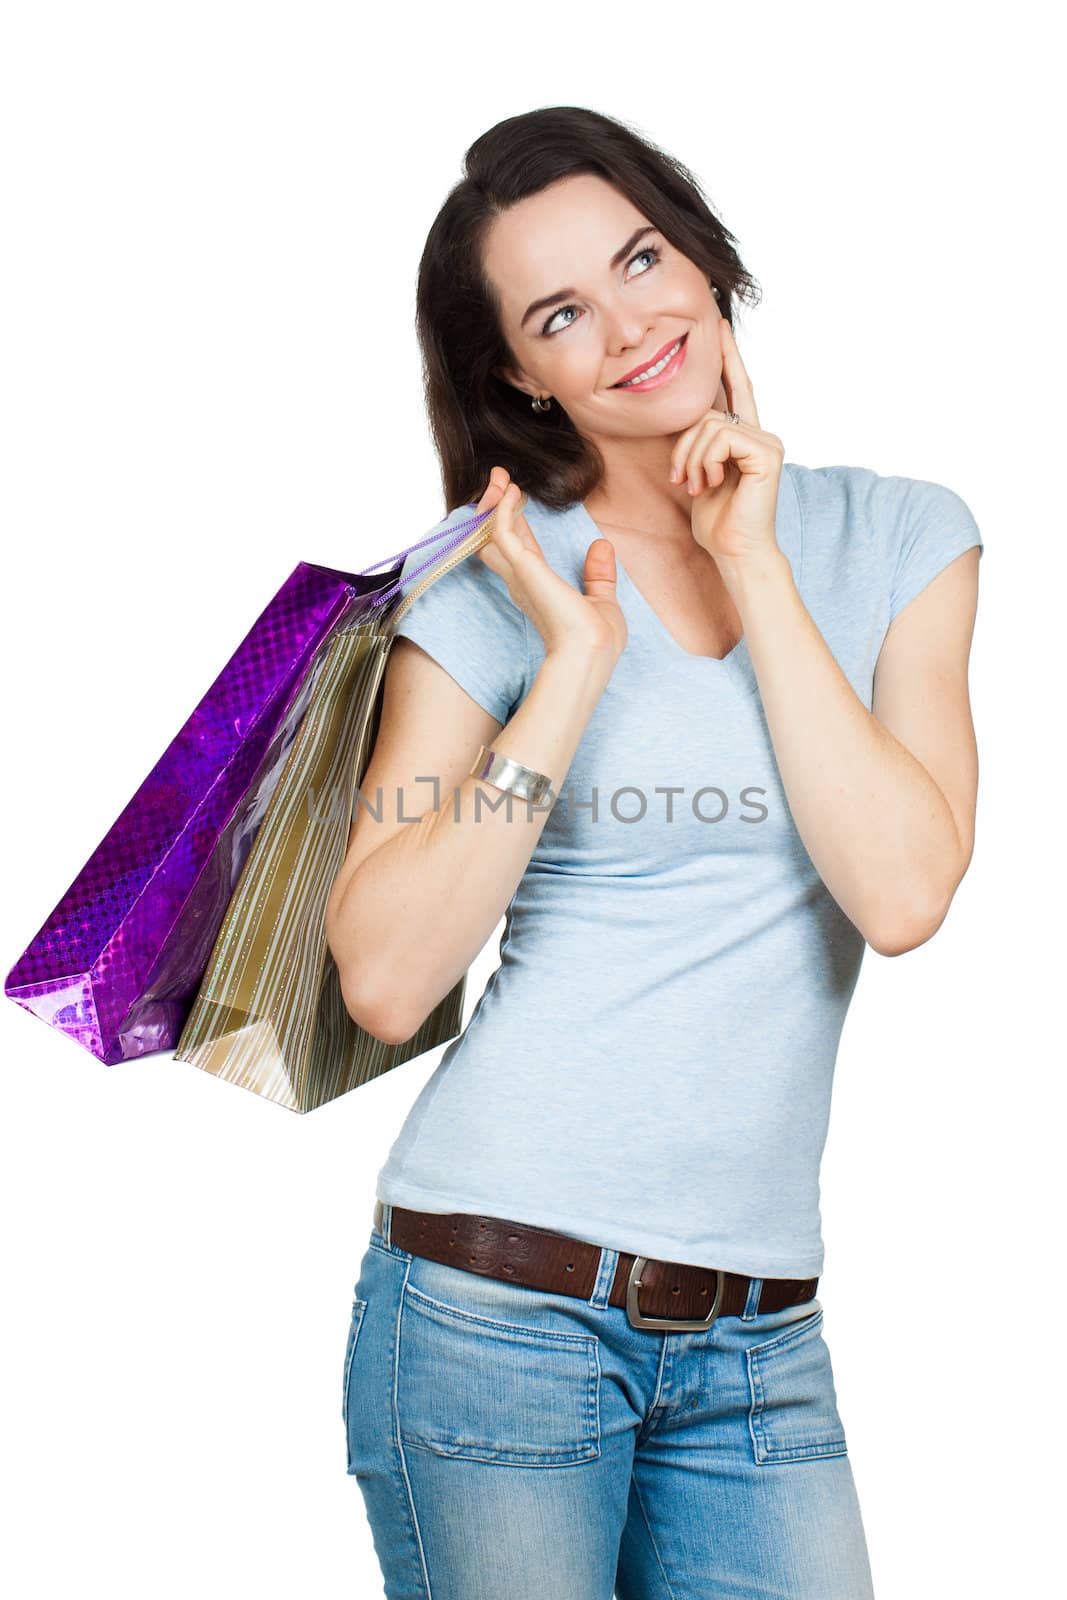 A beautiful contemplative woman holding shopping bags and looking at copy-space. Isolated on white.